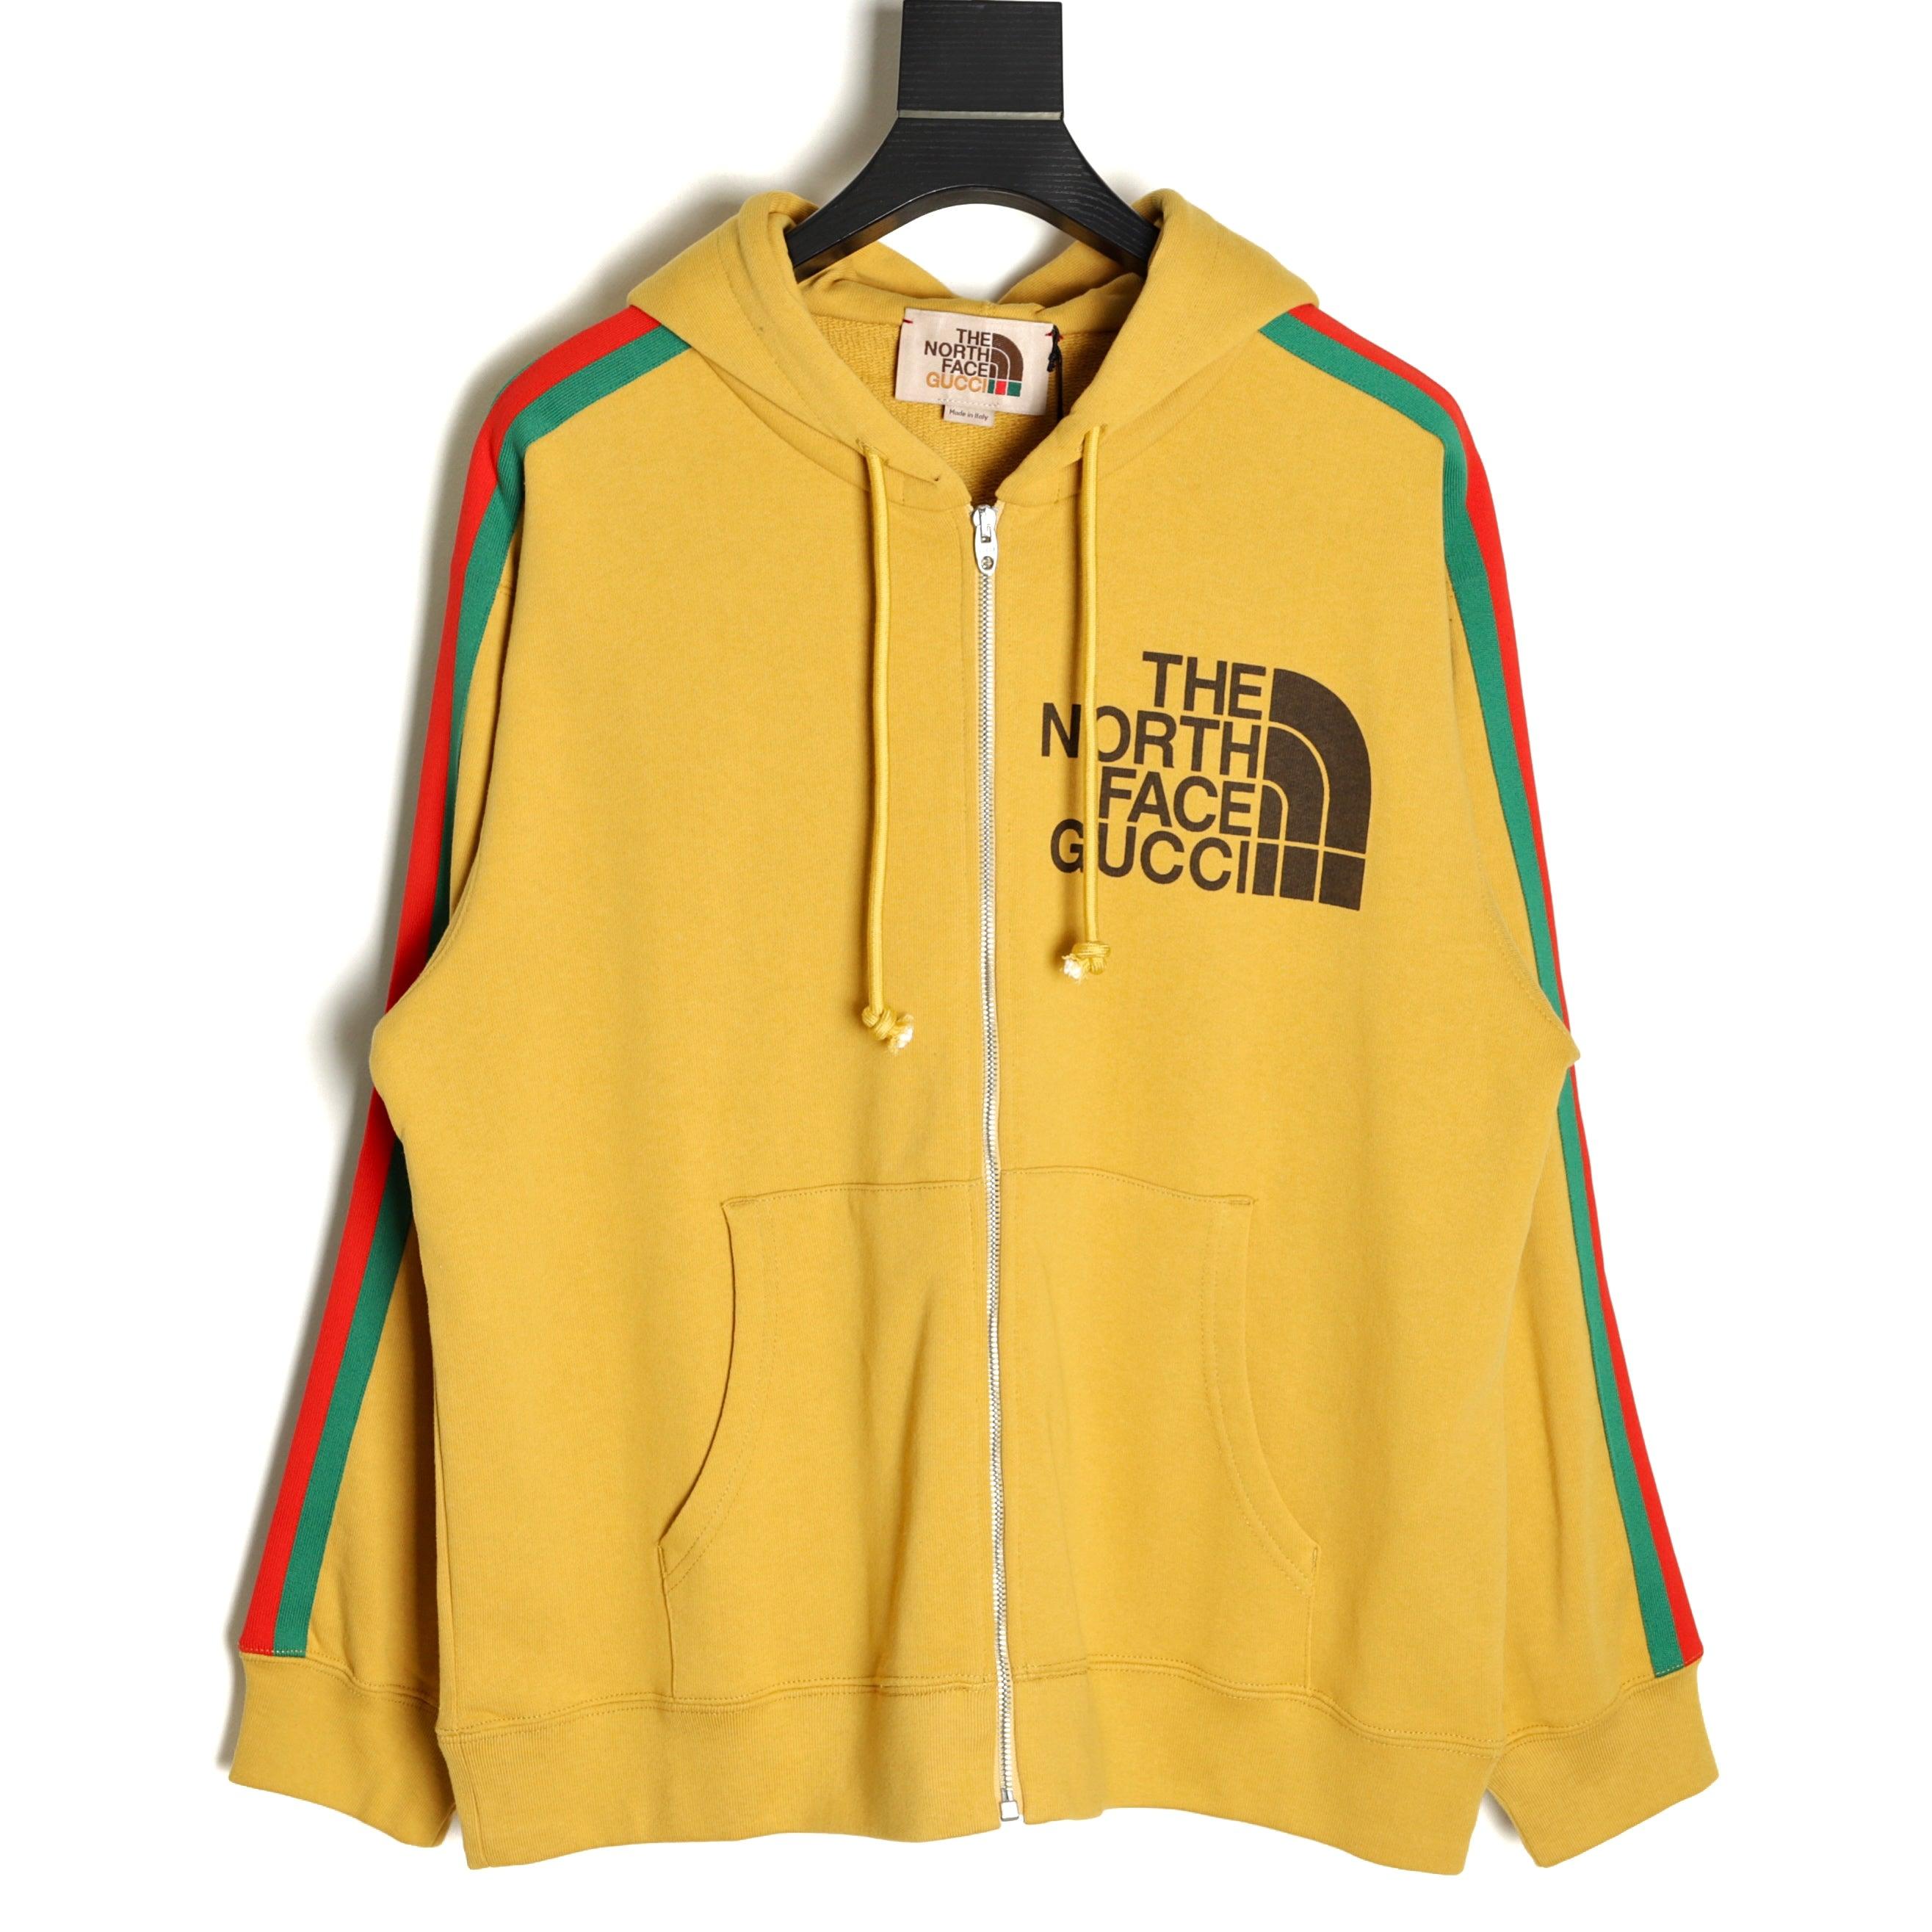 GUCCI x THE NORTH FACE 21FW YELLOW HOODIE